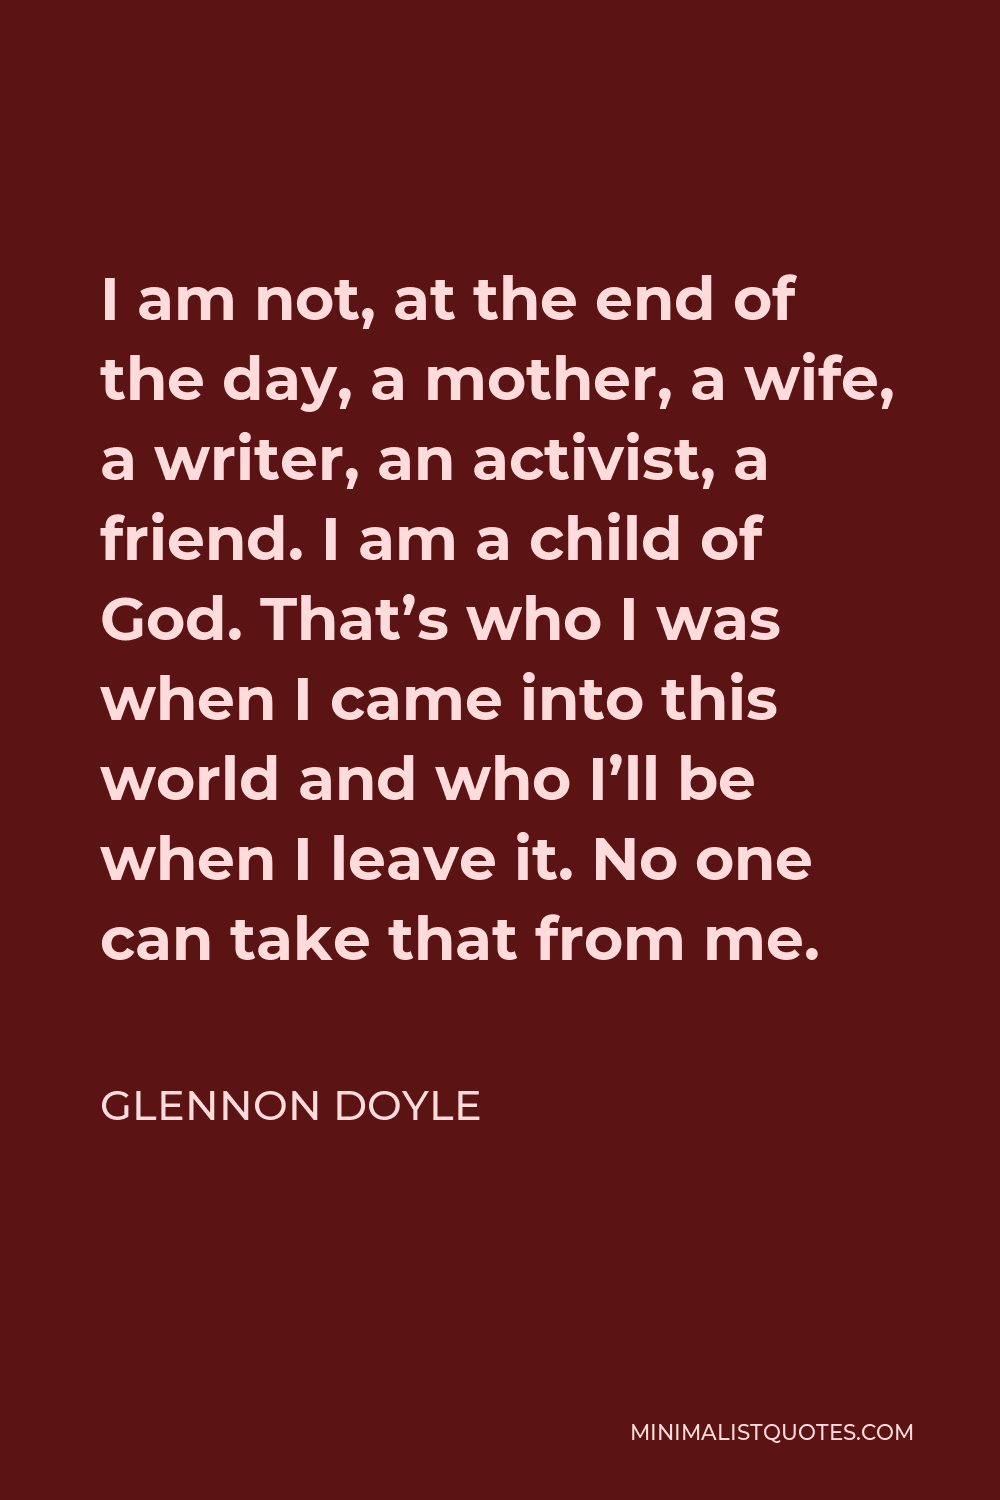 Glennon Doyle Quote - I am not, at the end of the day, a mother, a wife, a writer, an activist, a friend. I am a child of God. That’s who I was when I came into this world and who I’ll be when I leave it. No one can take that from me.